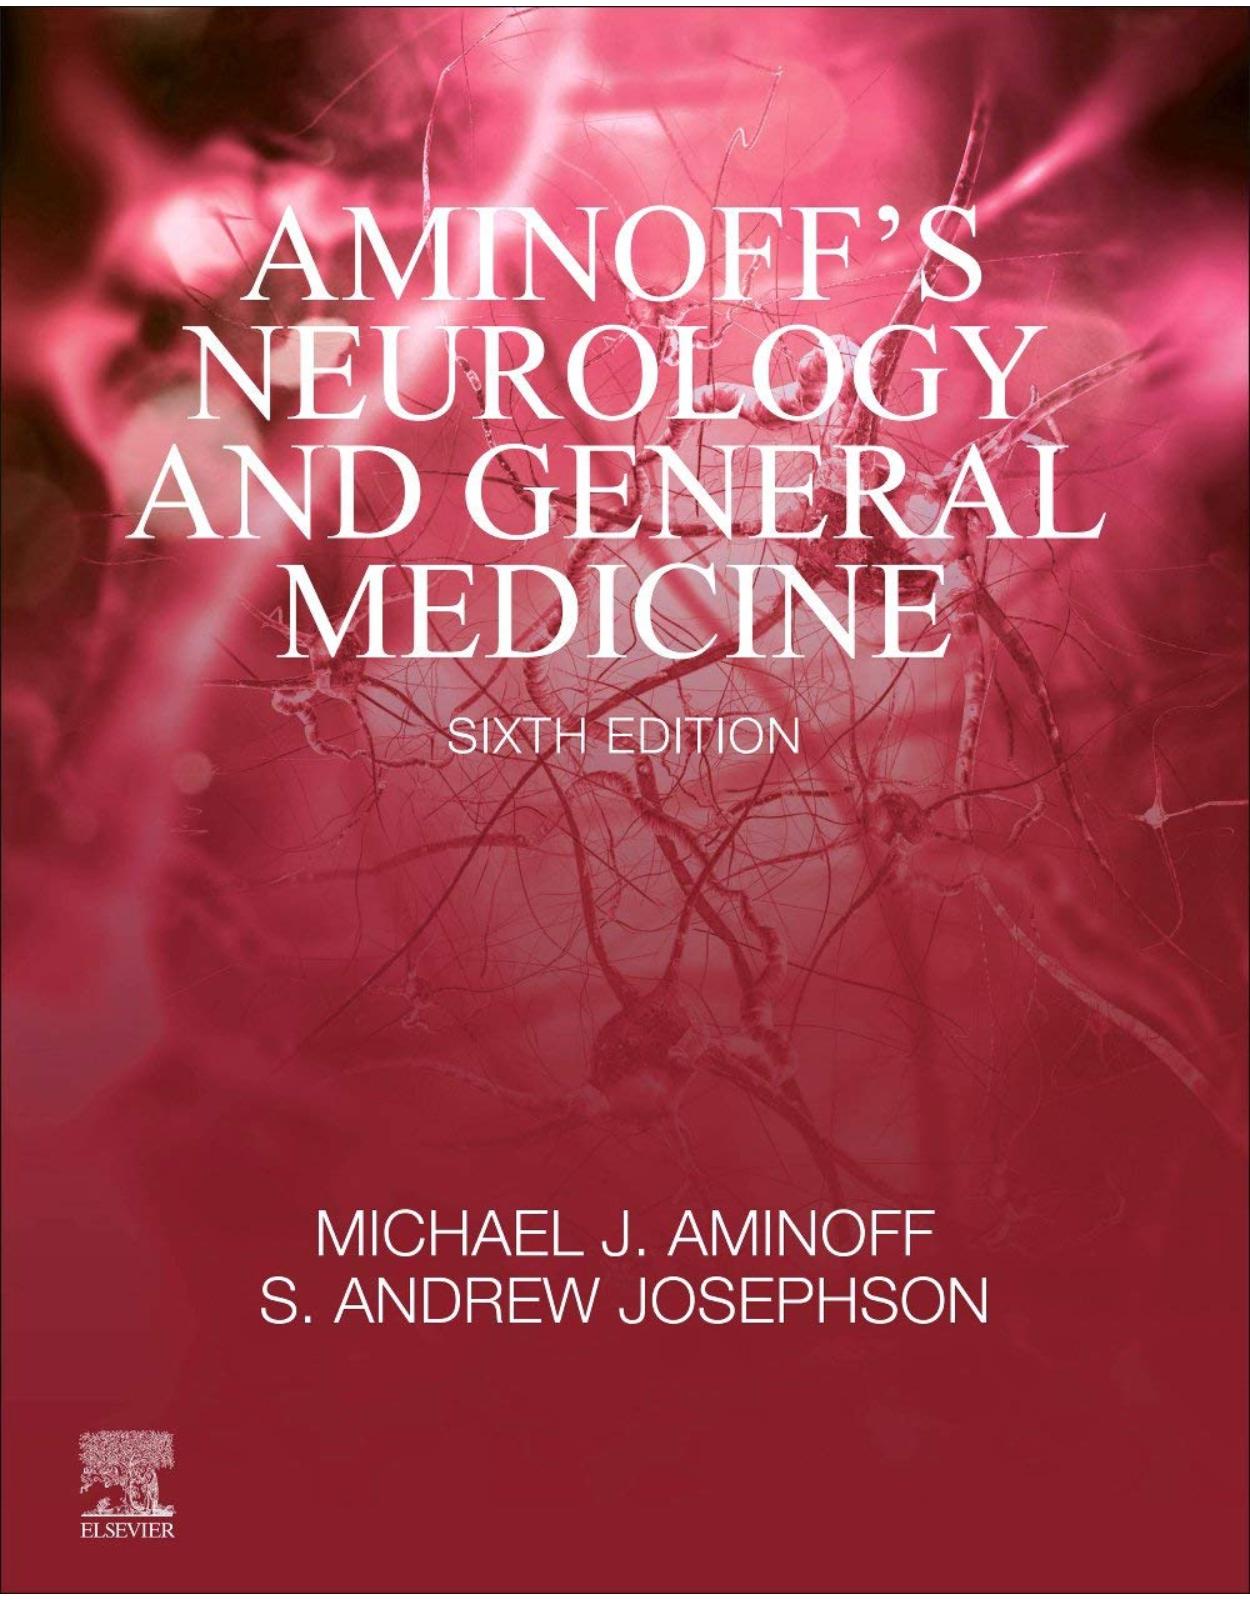 Aminoff’s Neurology and General Medicine